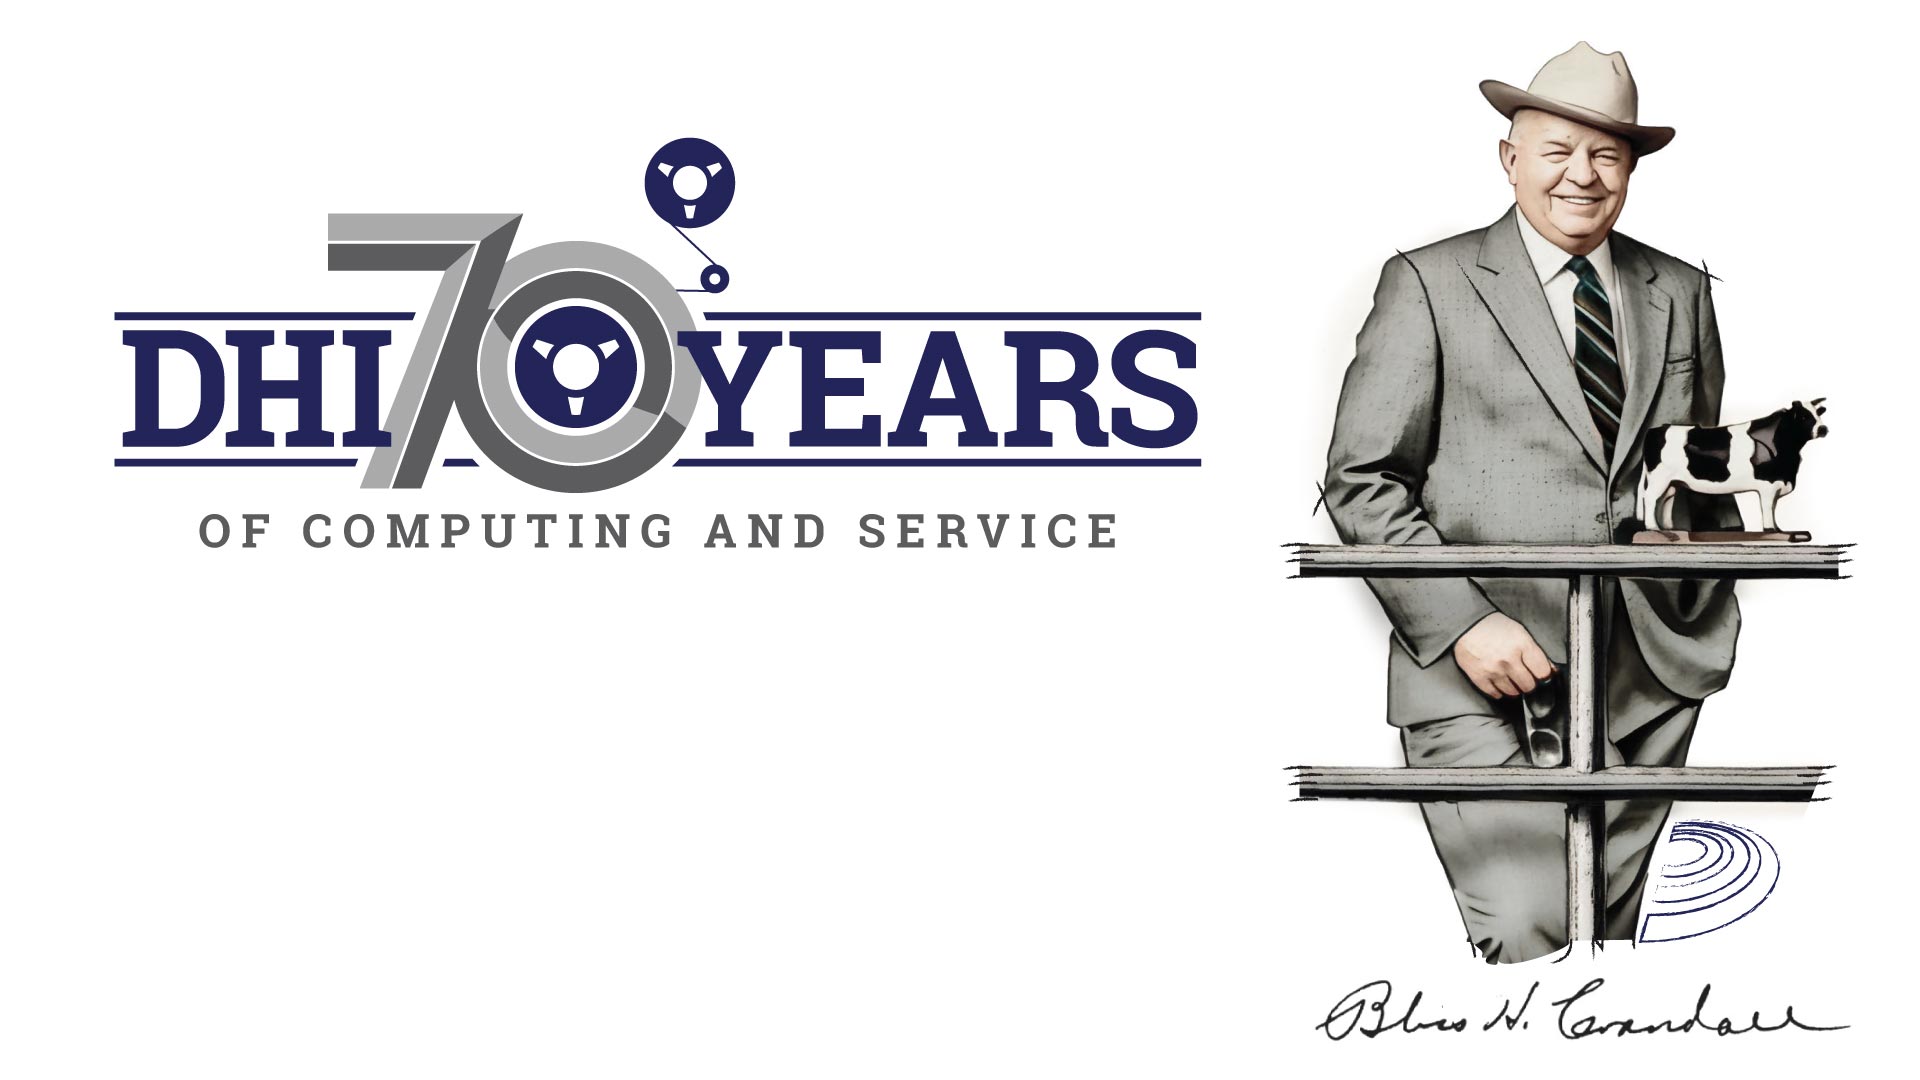 70 Years of Computing and Service